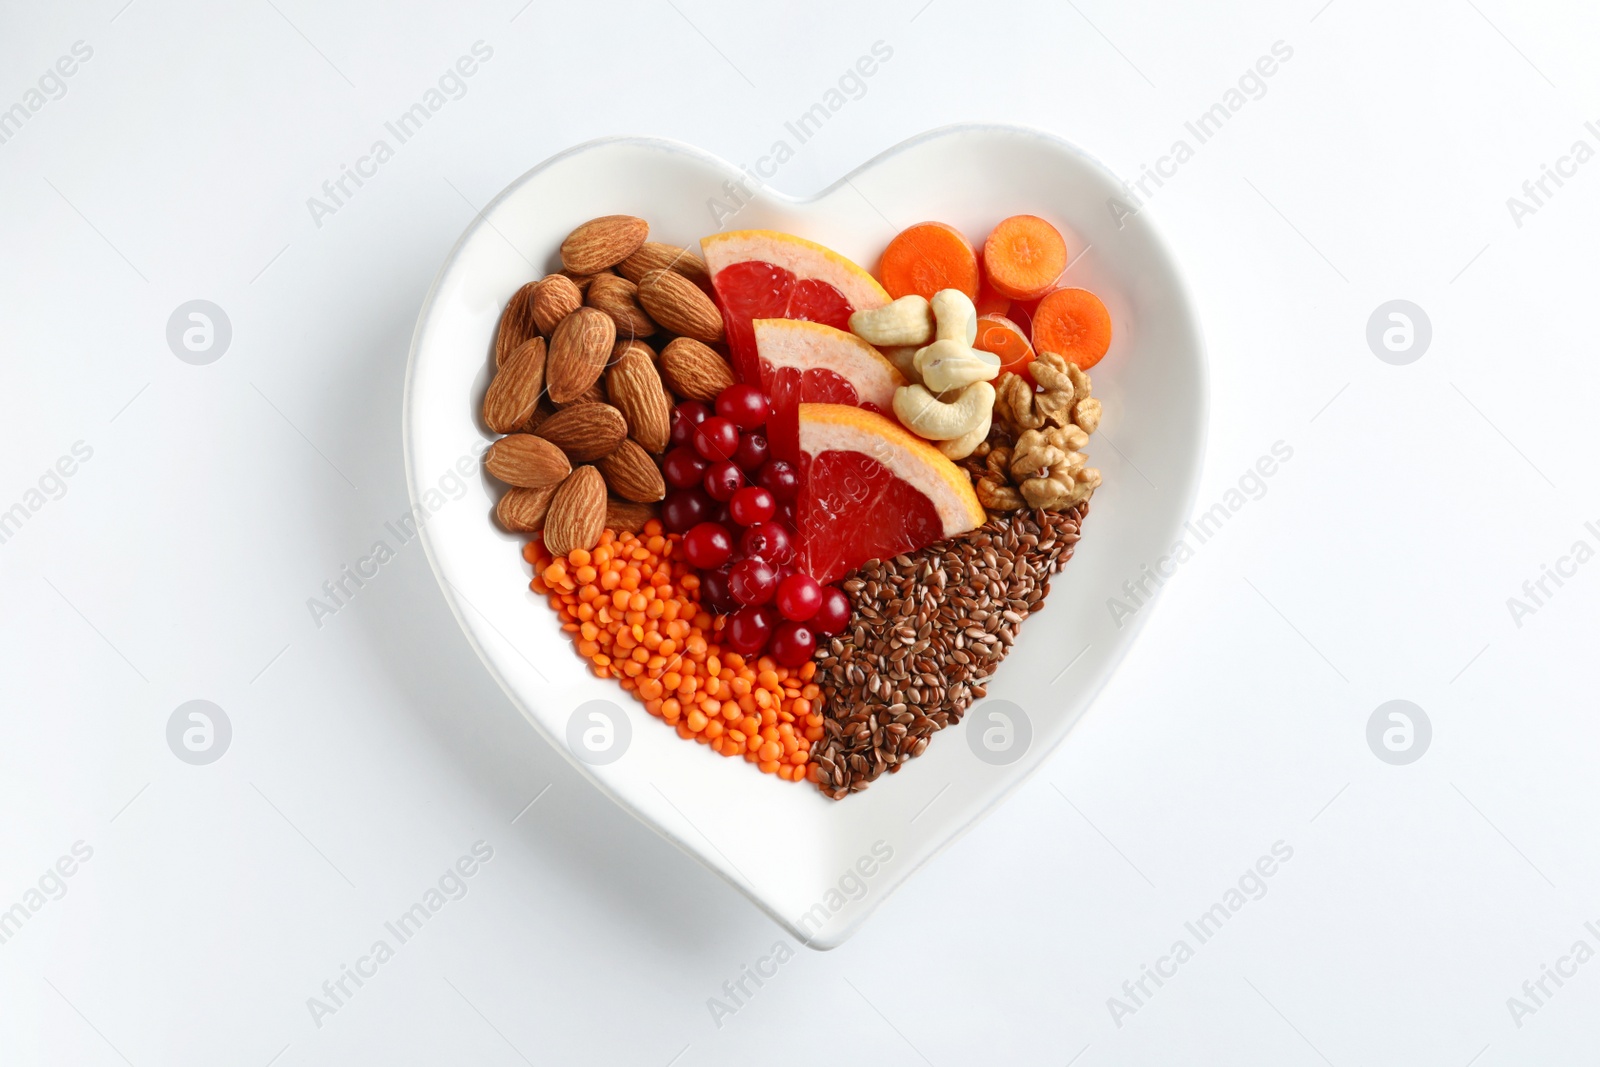 Photo of Plate with products for heart-healthy diet on white background, top view